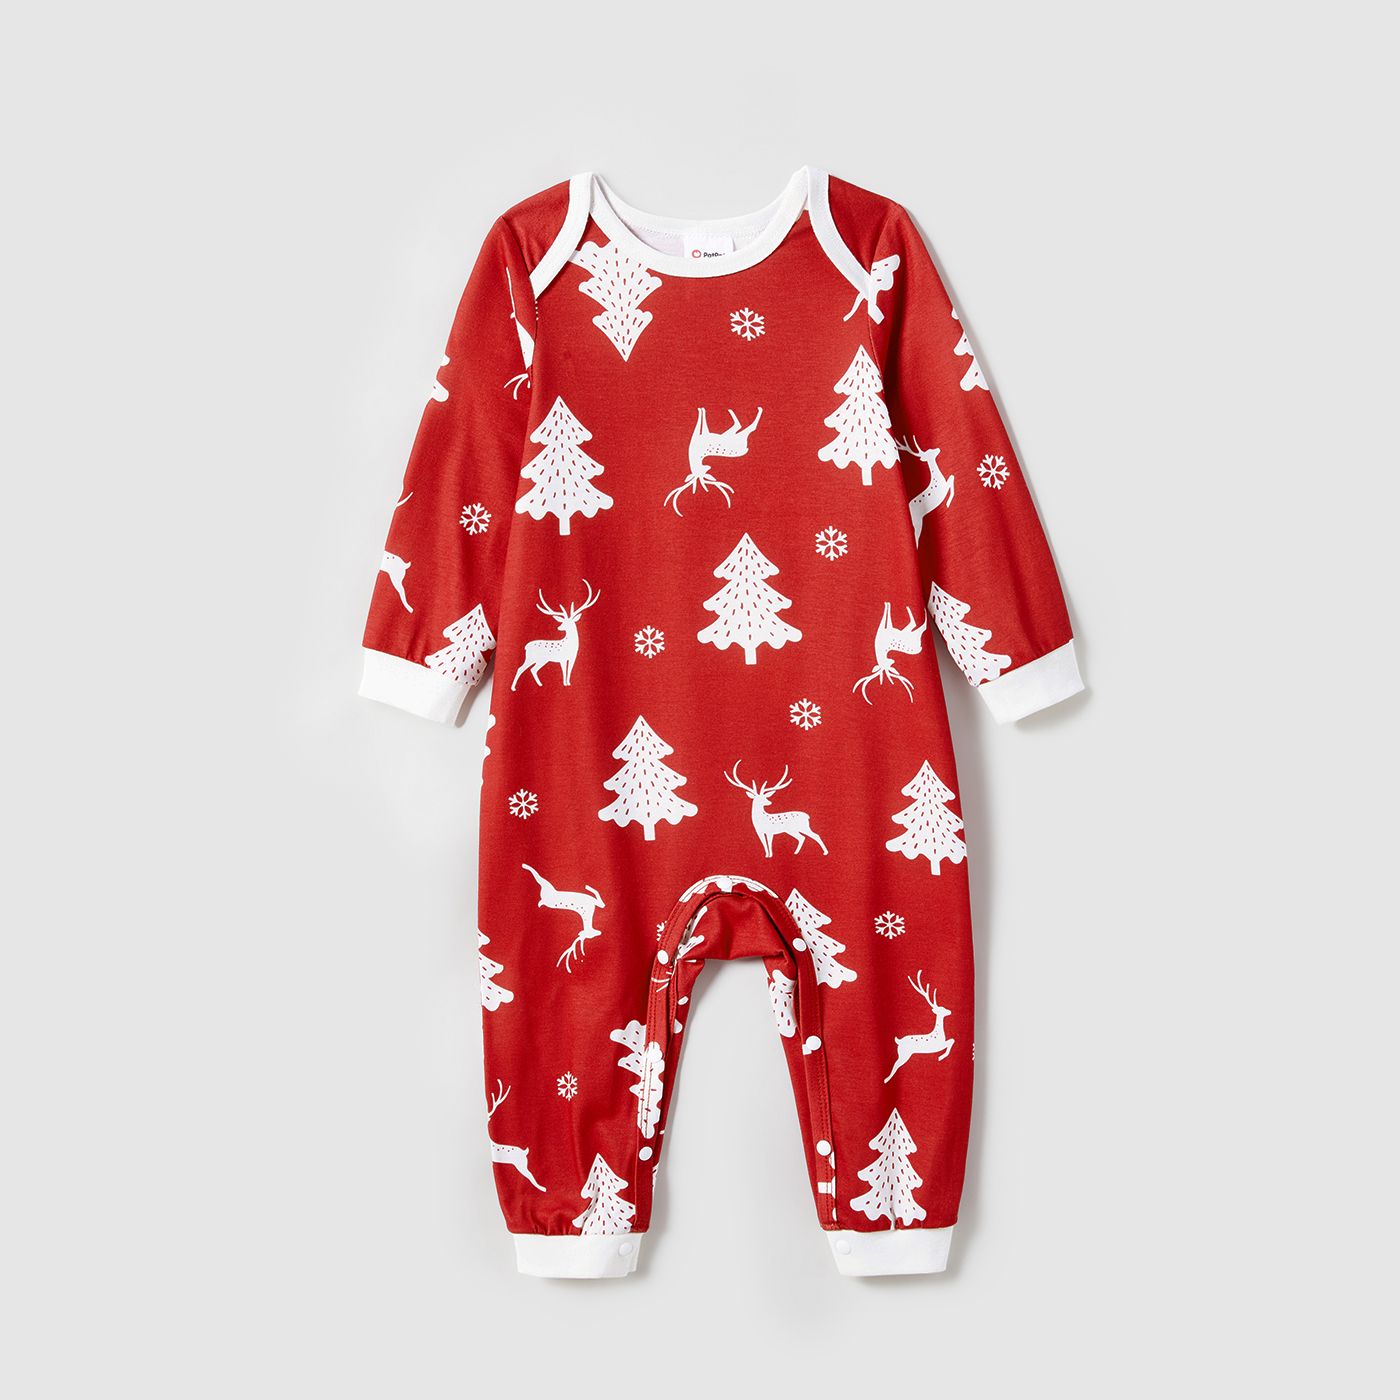 Christmas Tree And Reindeer Allover Print Family Matching Long-sleeve Onesies Pajamas Sets (Flame Resistant)